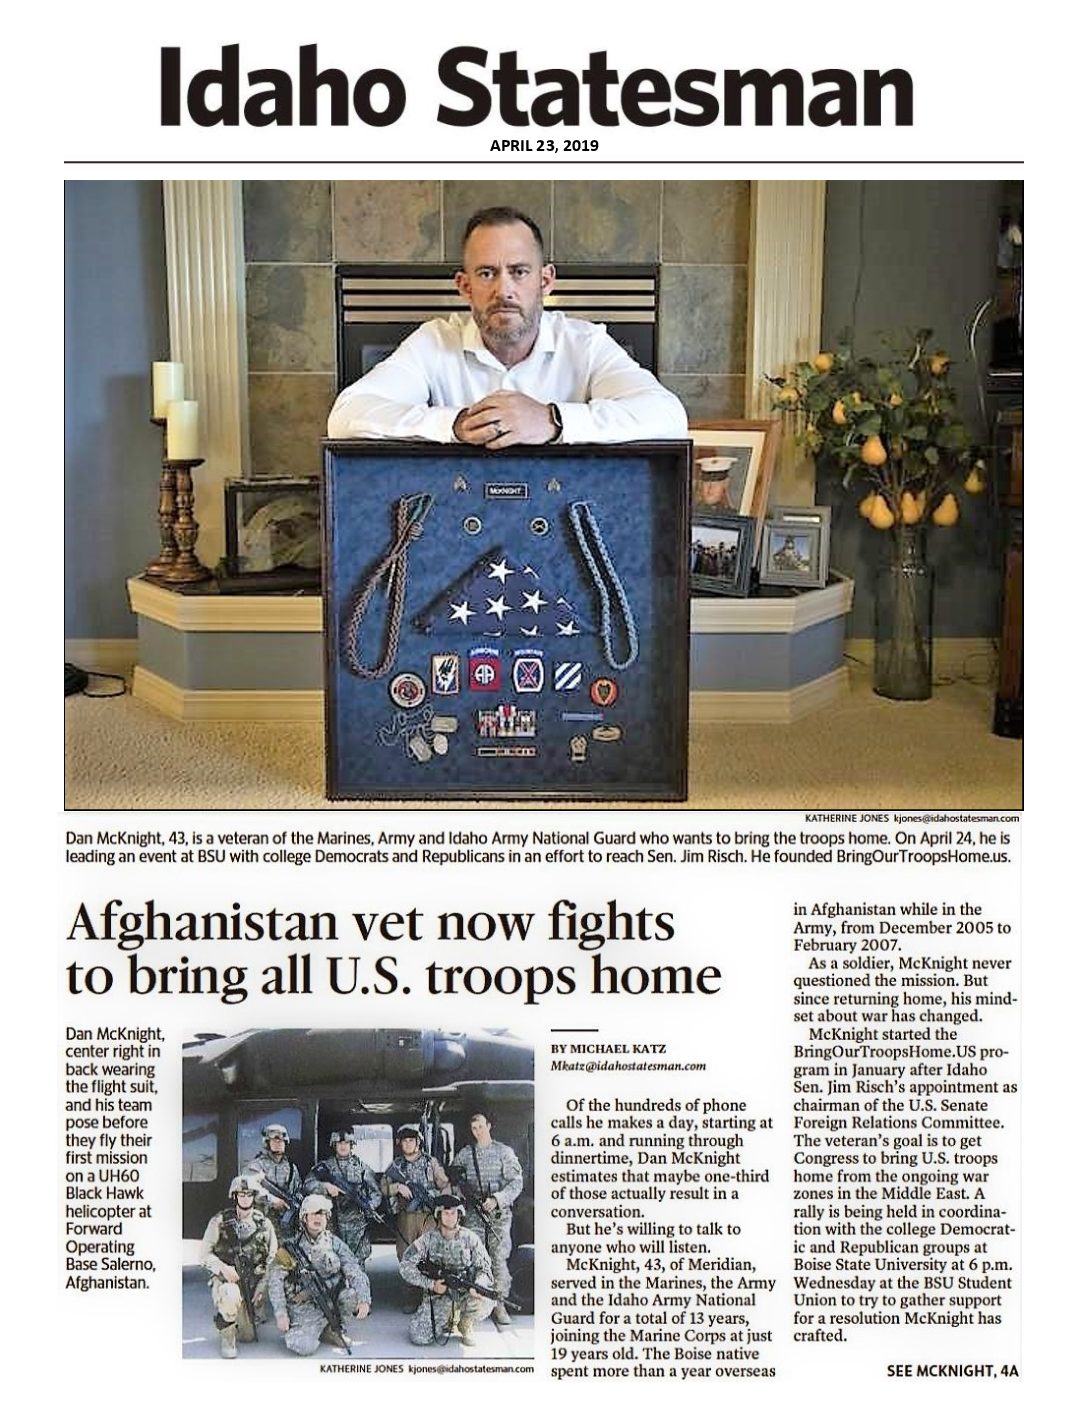 Idaho Statesman story – Afghanistan vet now fights to bring all U.S. troops home